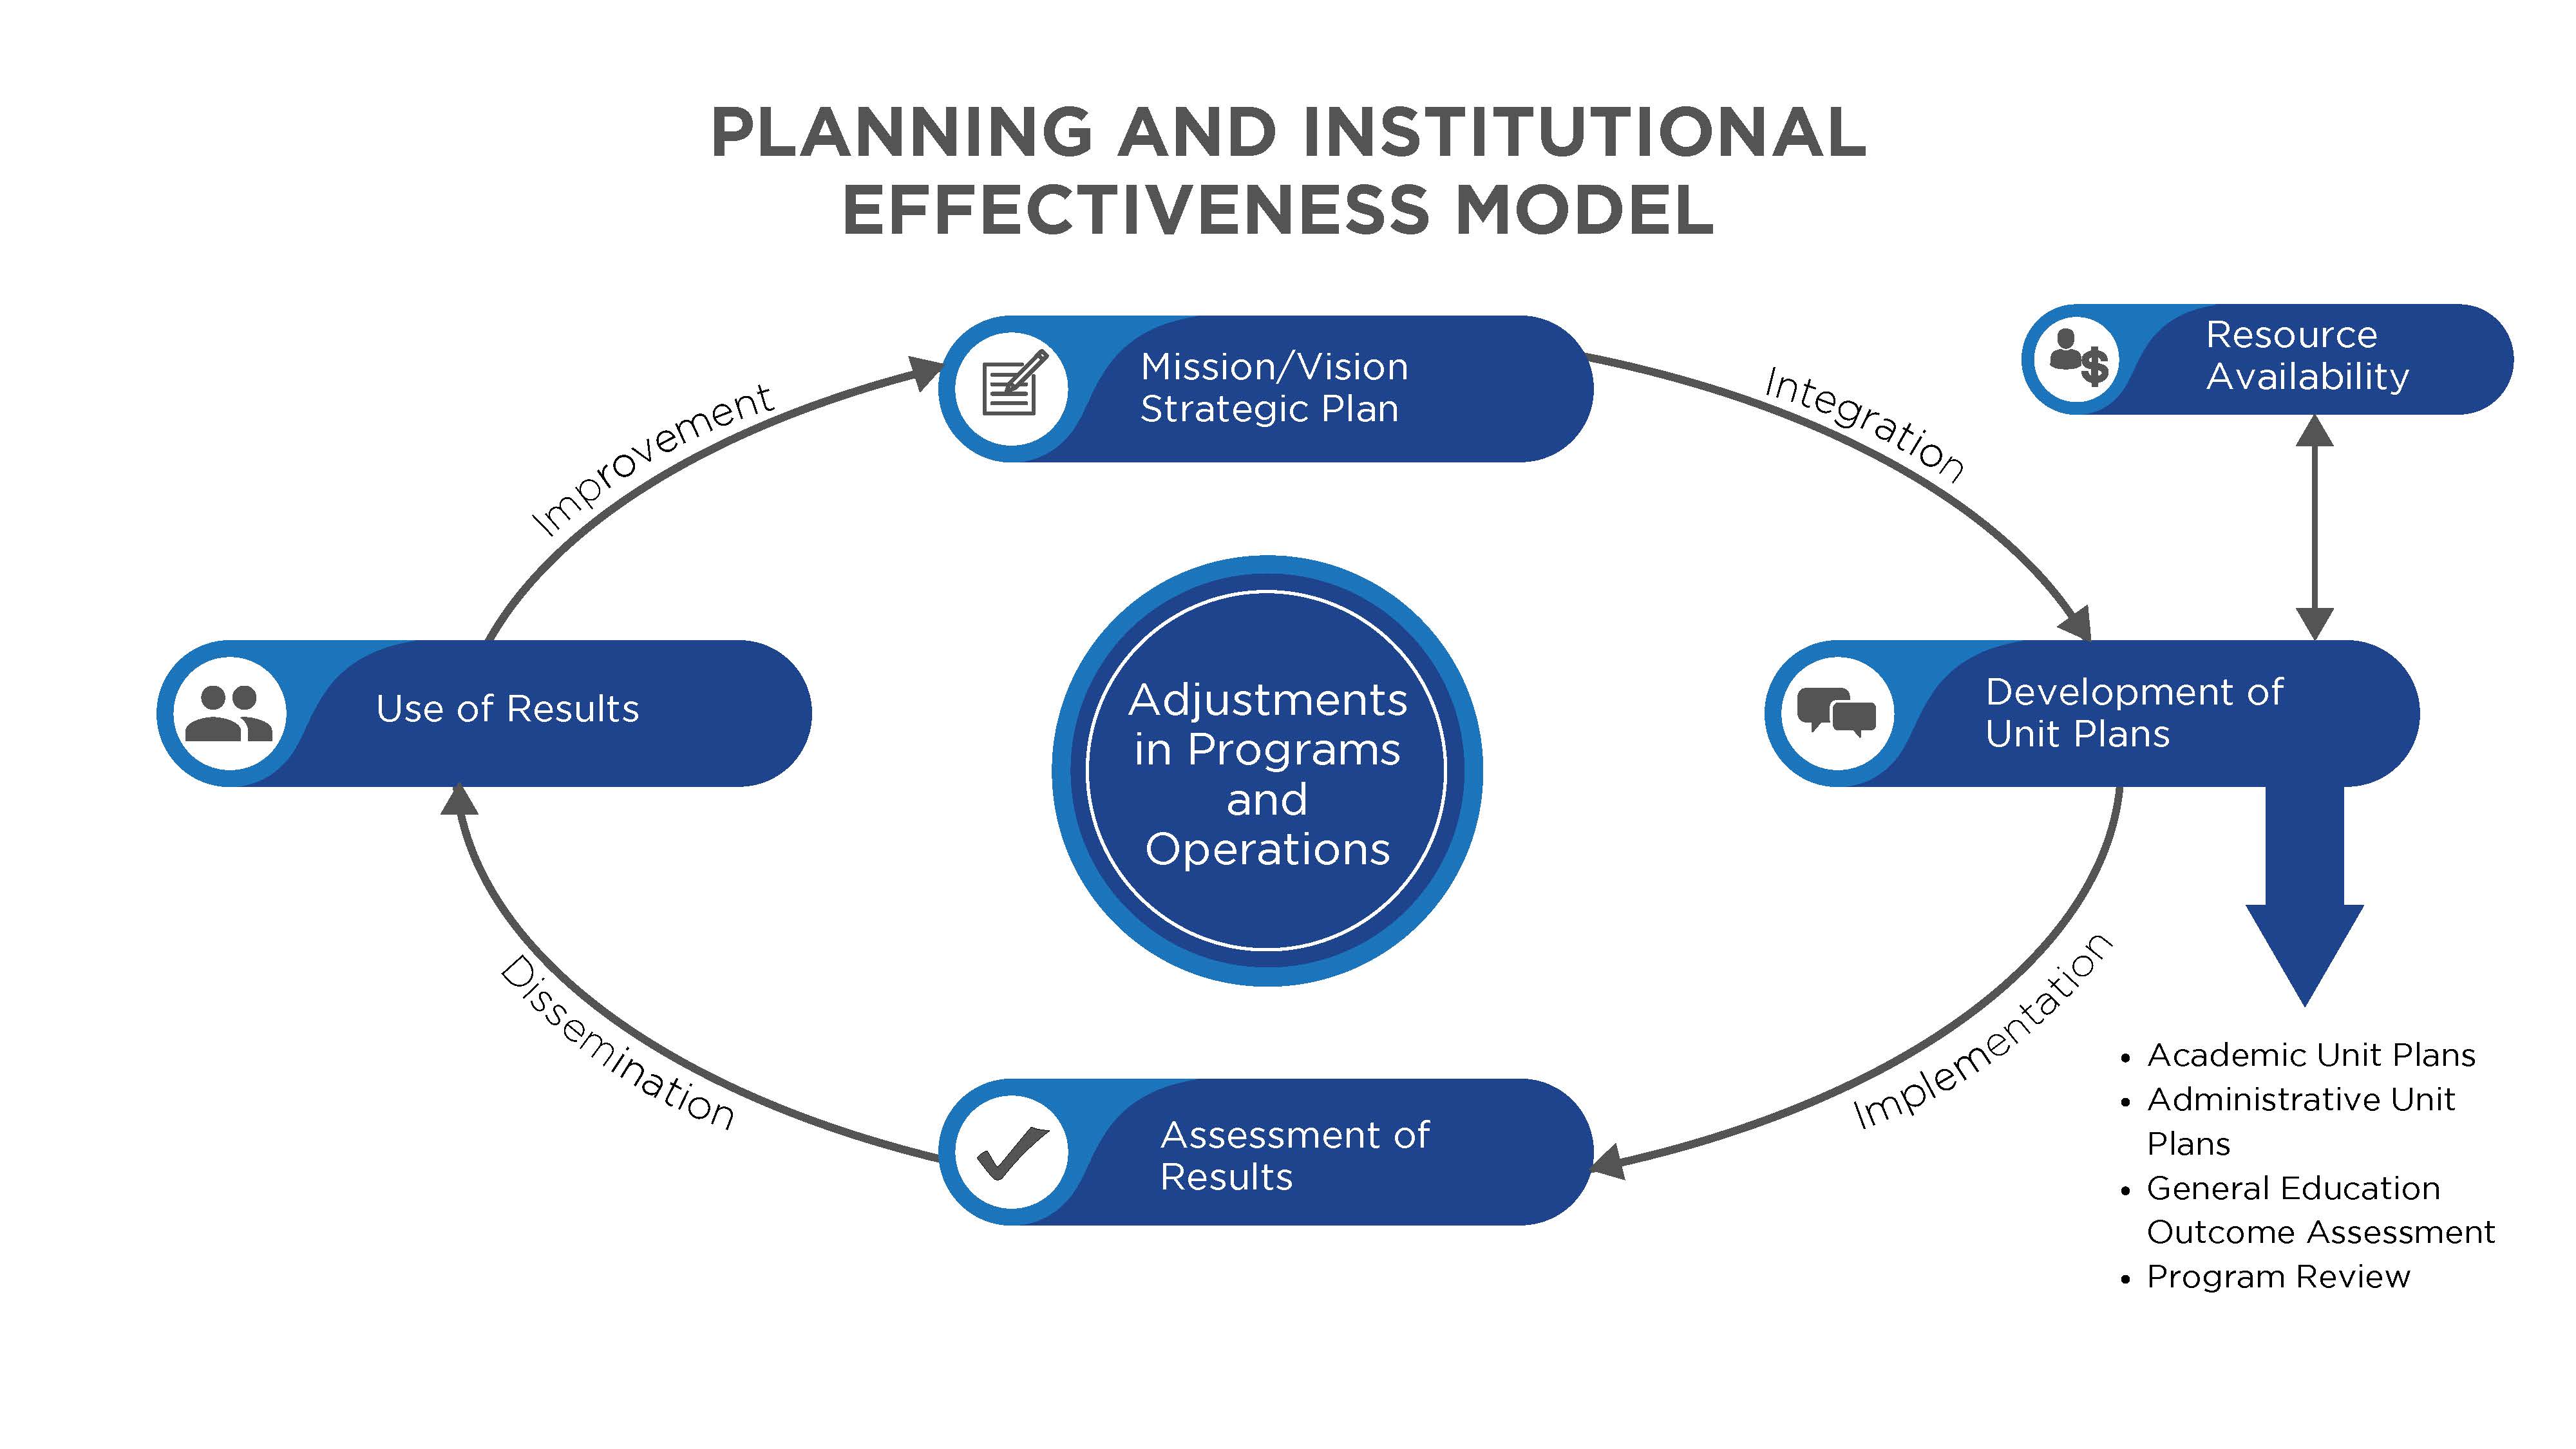 Planning-and-Institutional-Effectiveness-Model.jpg